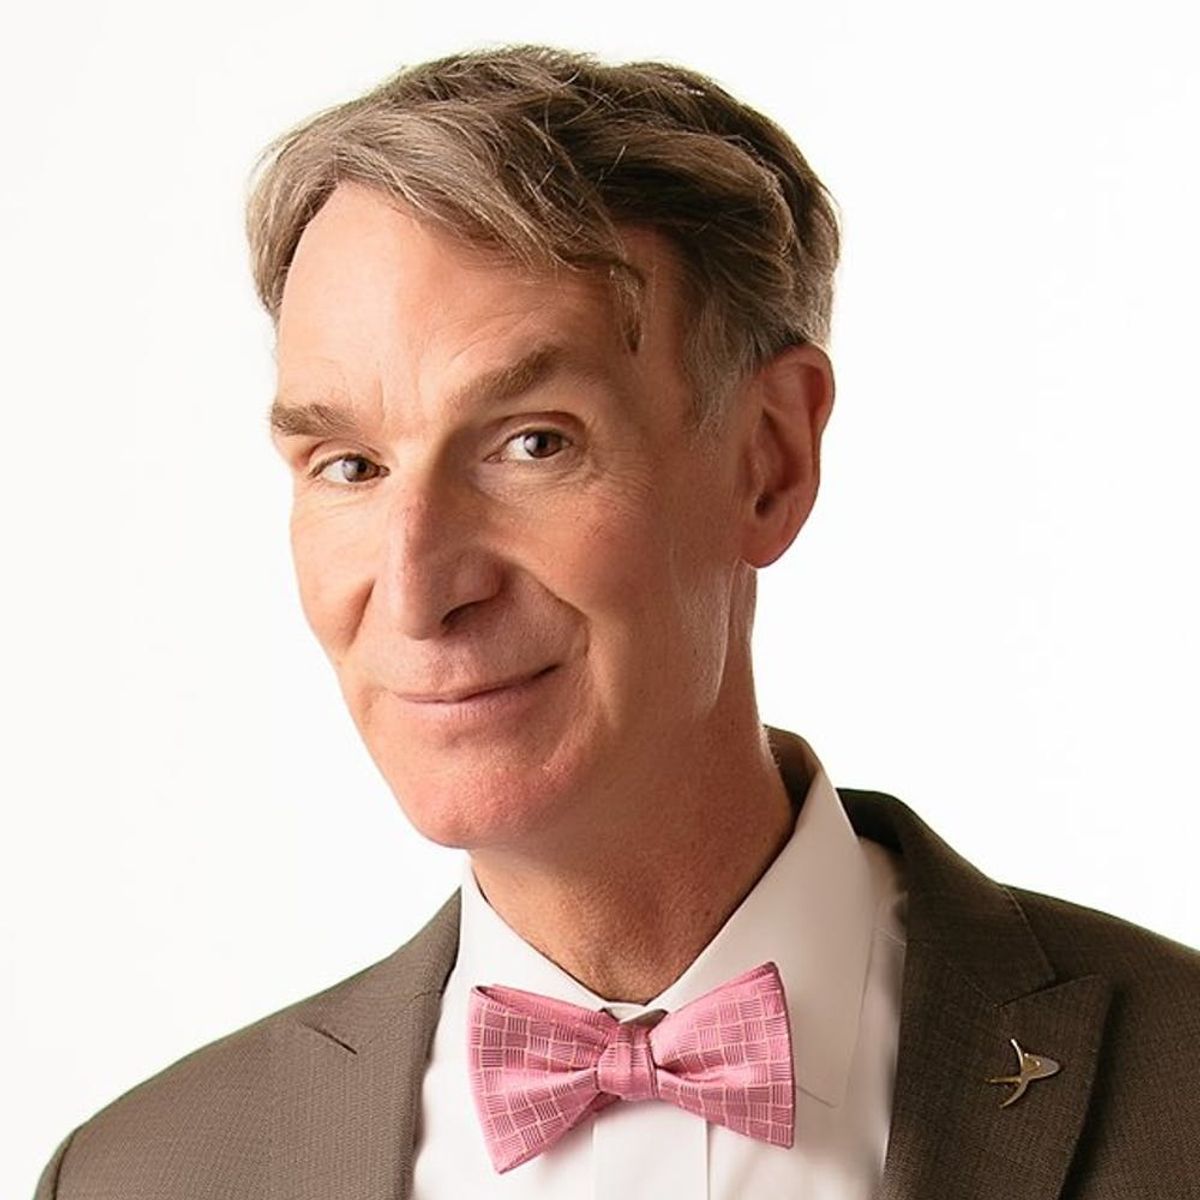 Bill Nye Is Headed to Netflix With a New Show That Will “Save the World”